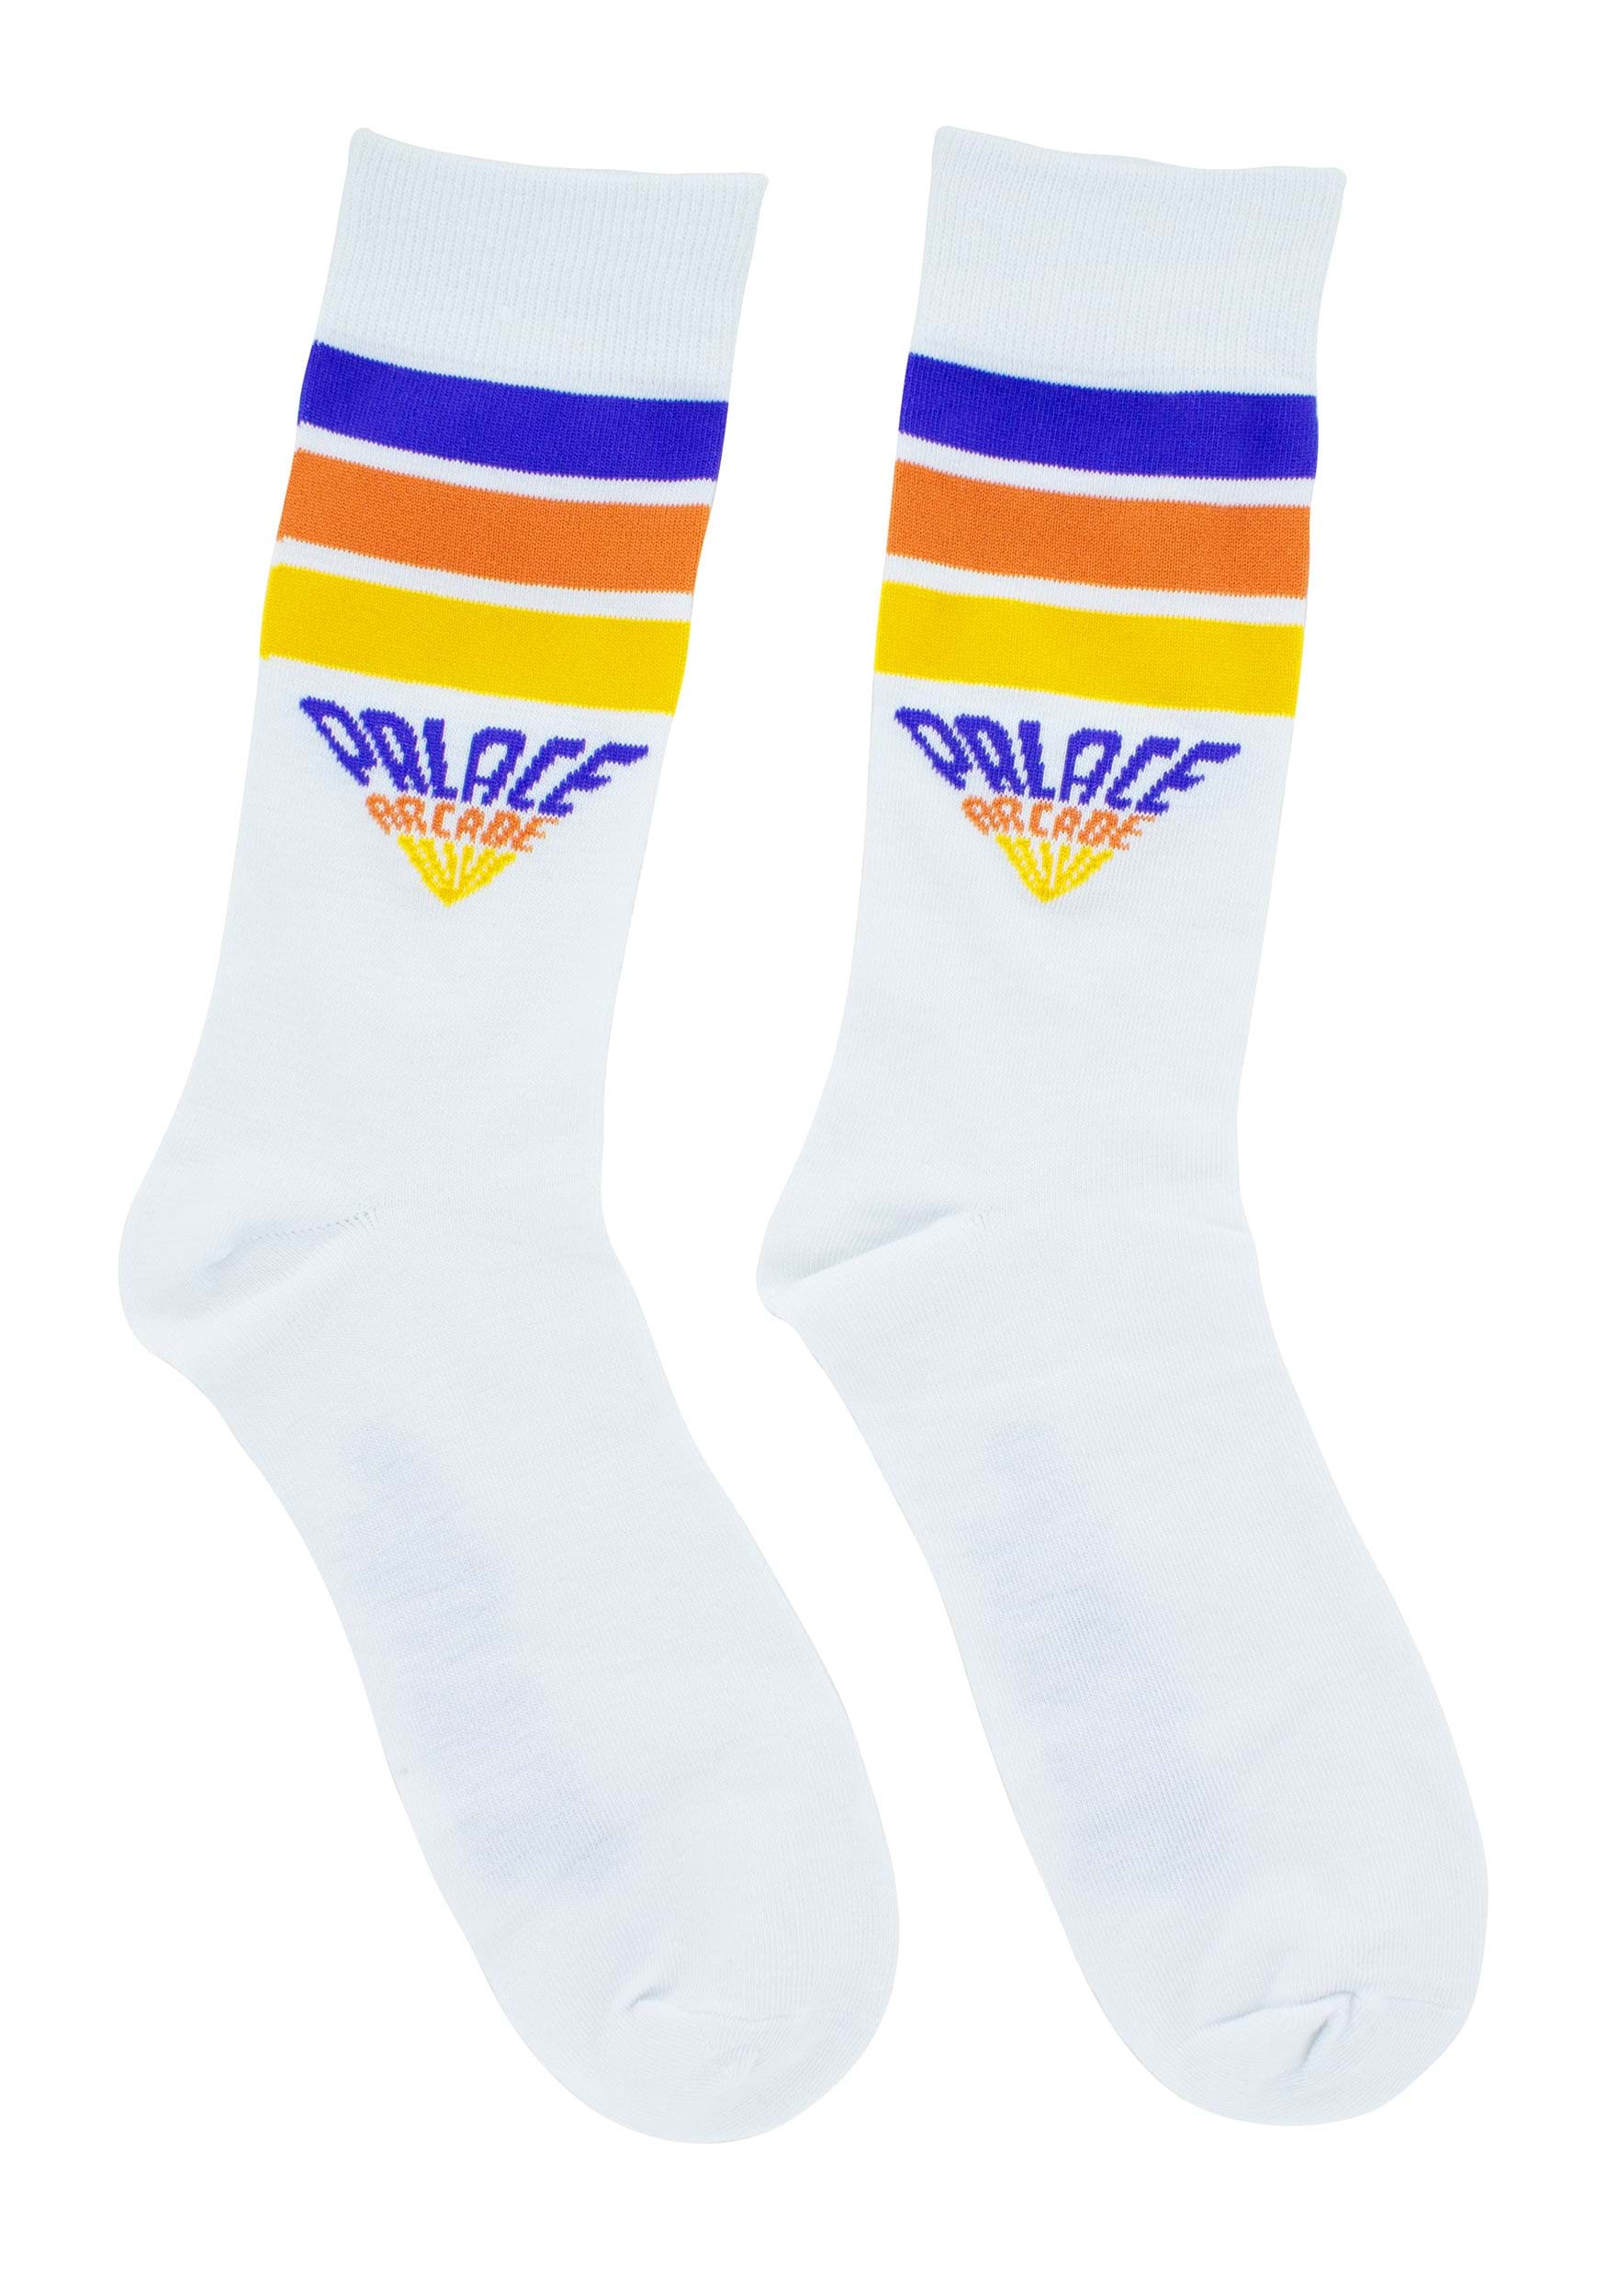 Photos - Other Toys Paladone Stranger Things Mug and Socks for Adults Blue/White/Yello 